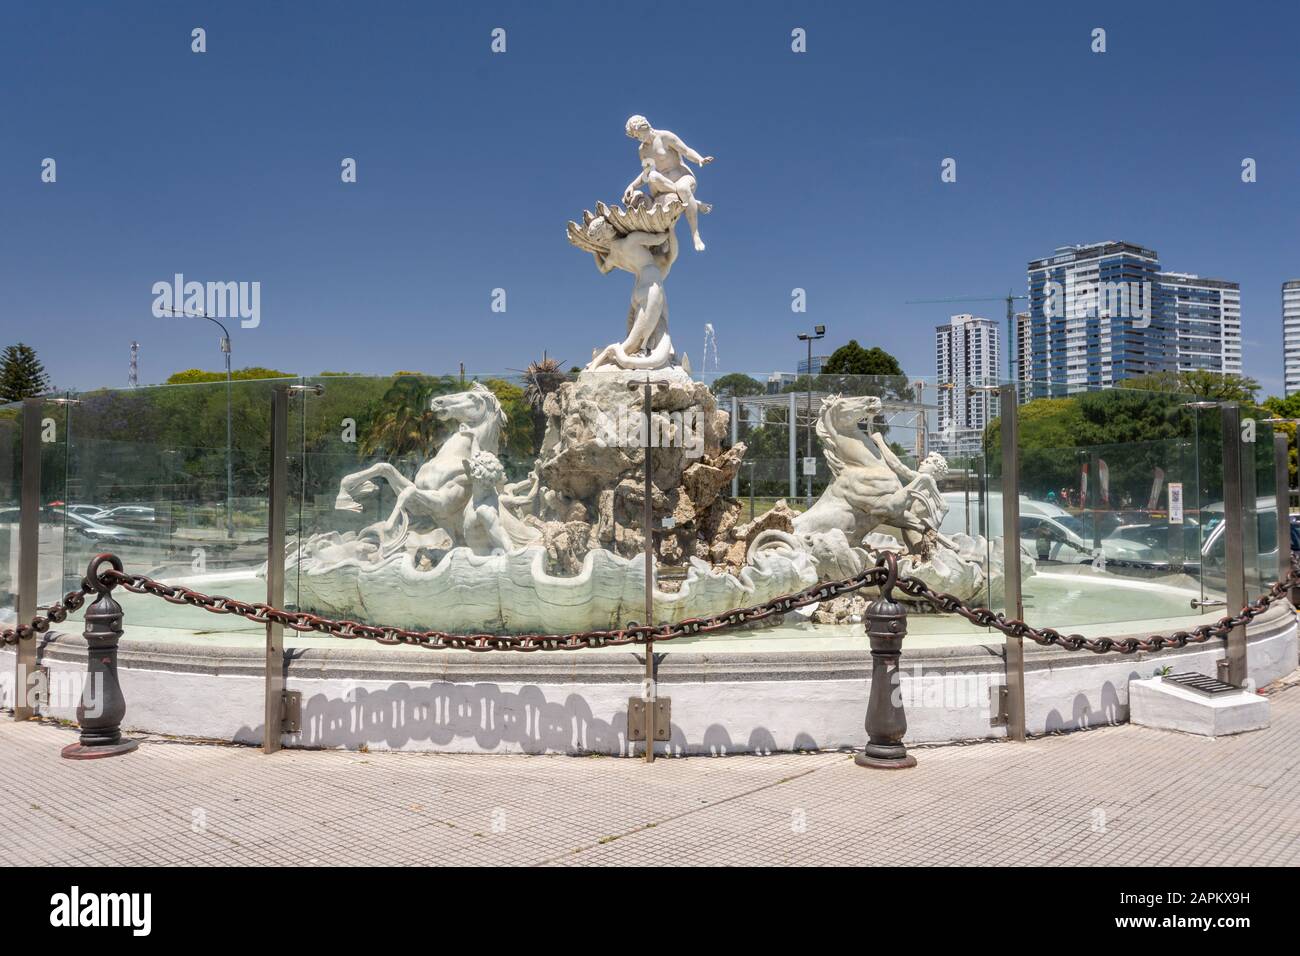 View to white fountain statue in Puerto Madero, Buenos Aires, Argentina Stock Photo